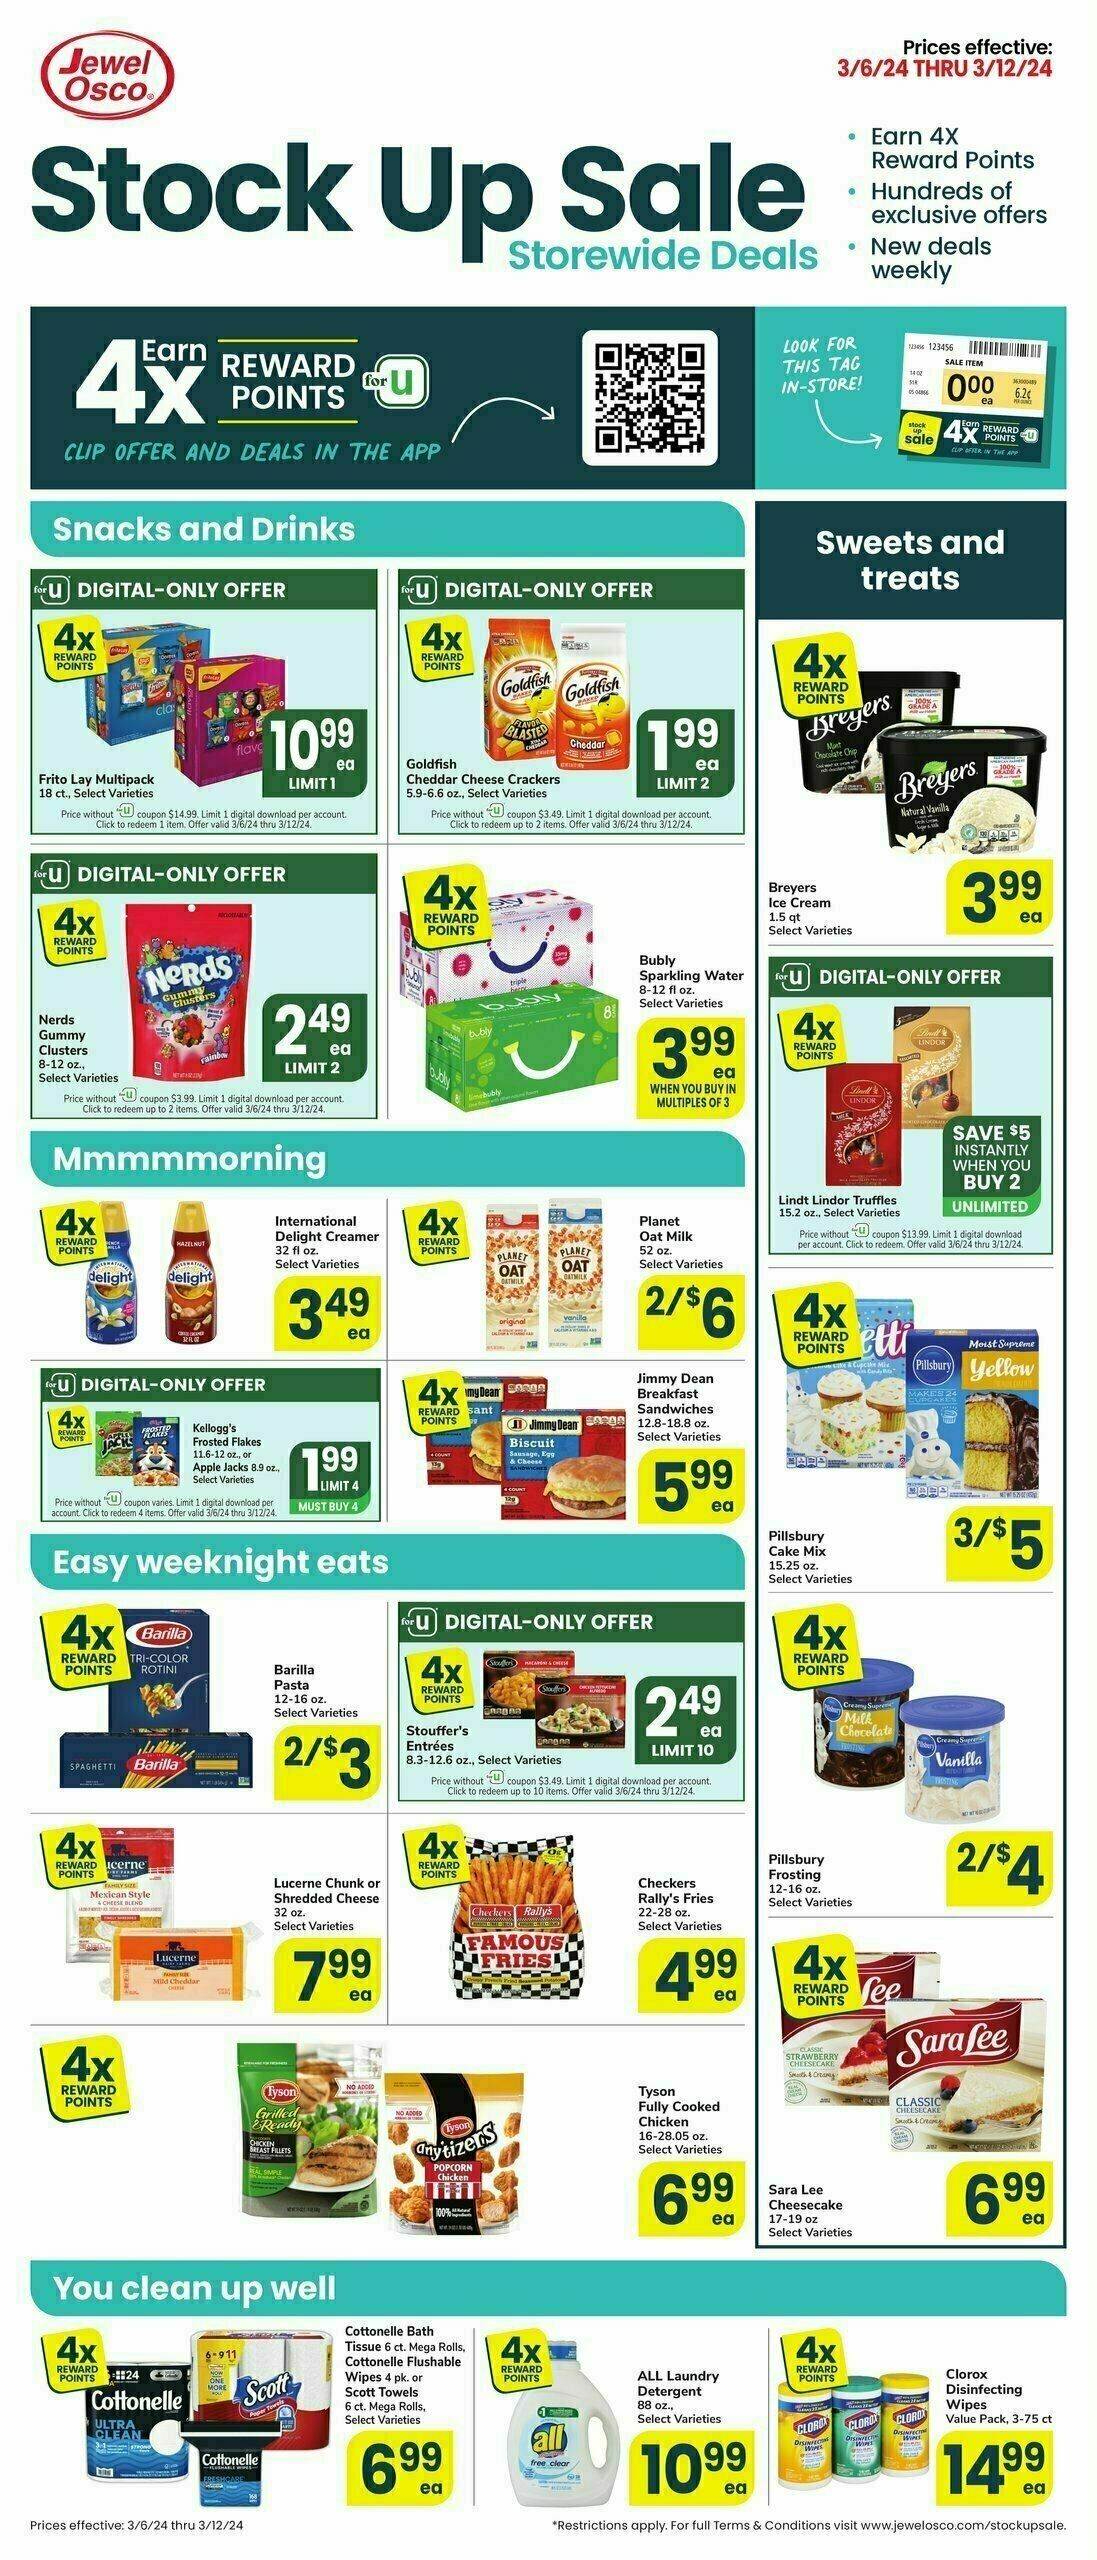 Jewel Osco Stock Up Sale Weekly Ad from March 6